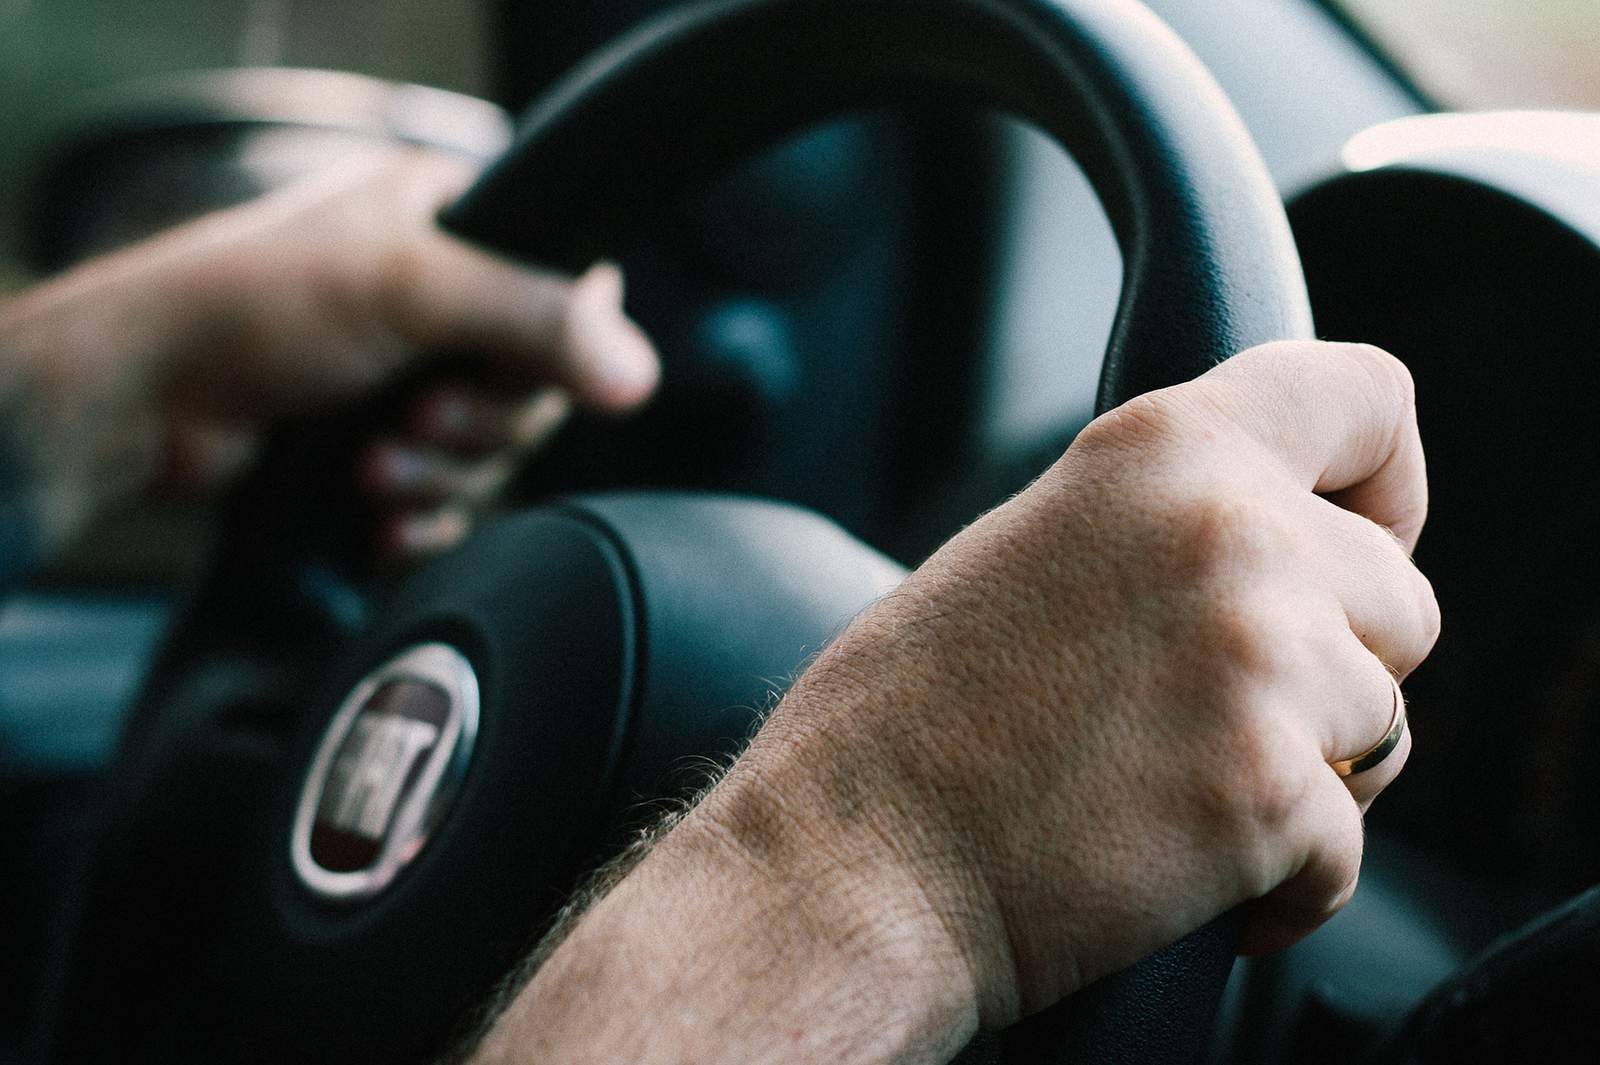 First-of-its-kind driving course for deaf or hard of hearing students launches in Texas